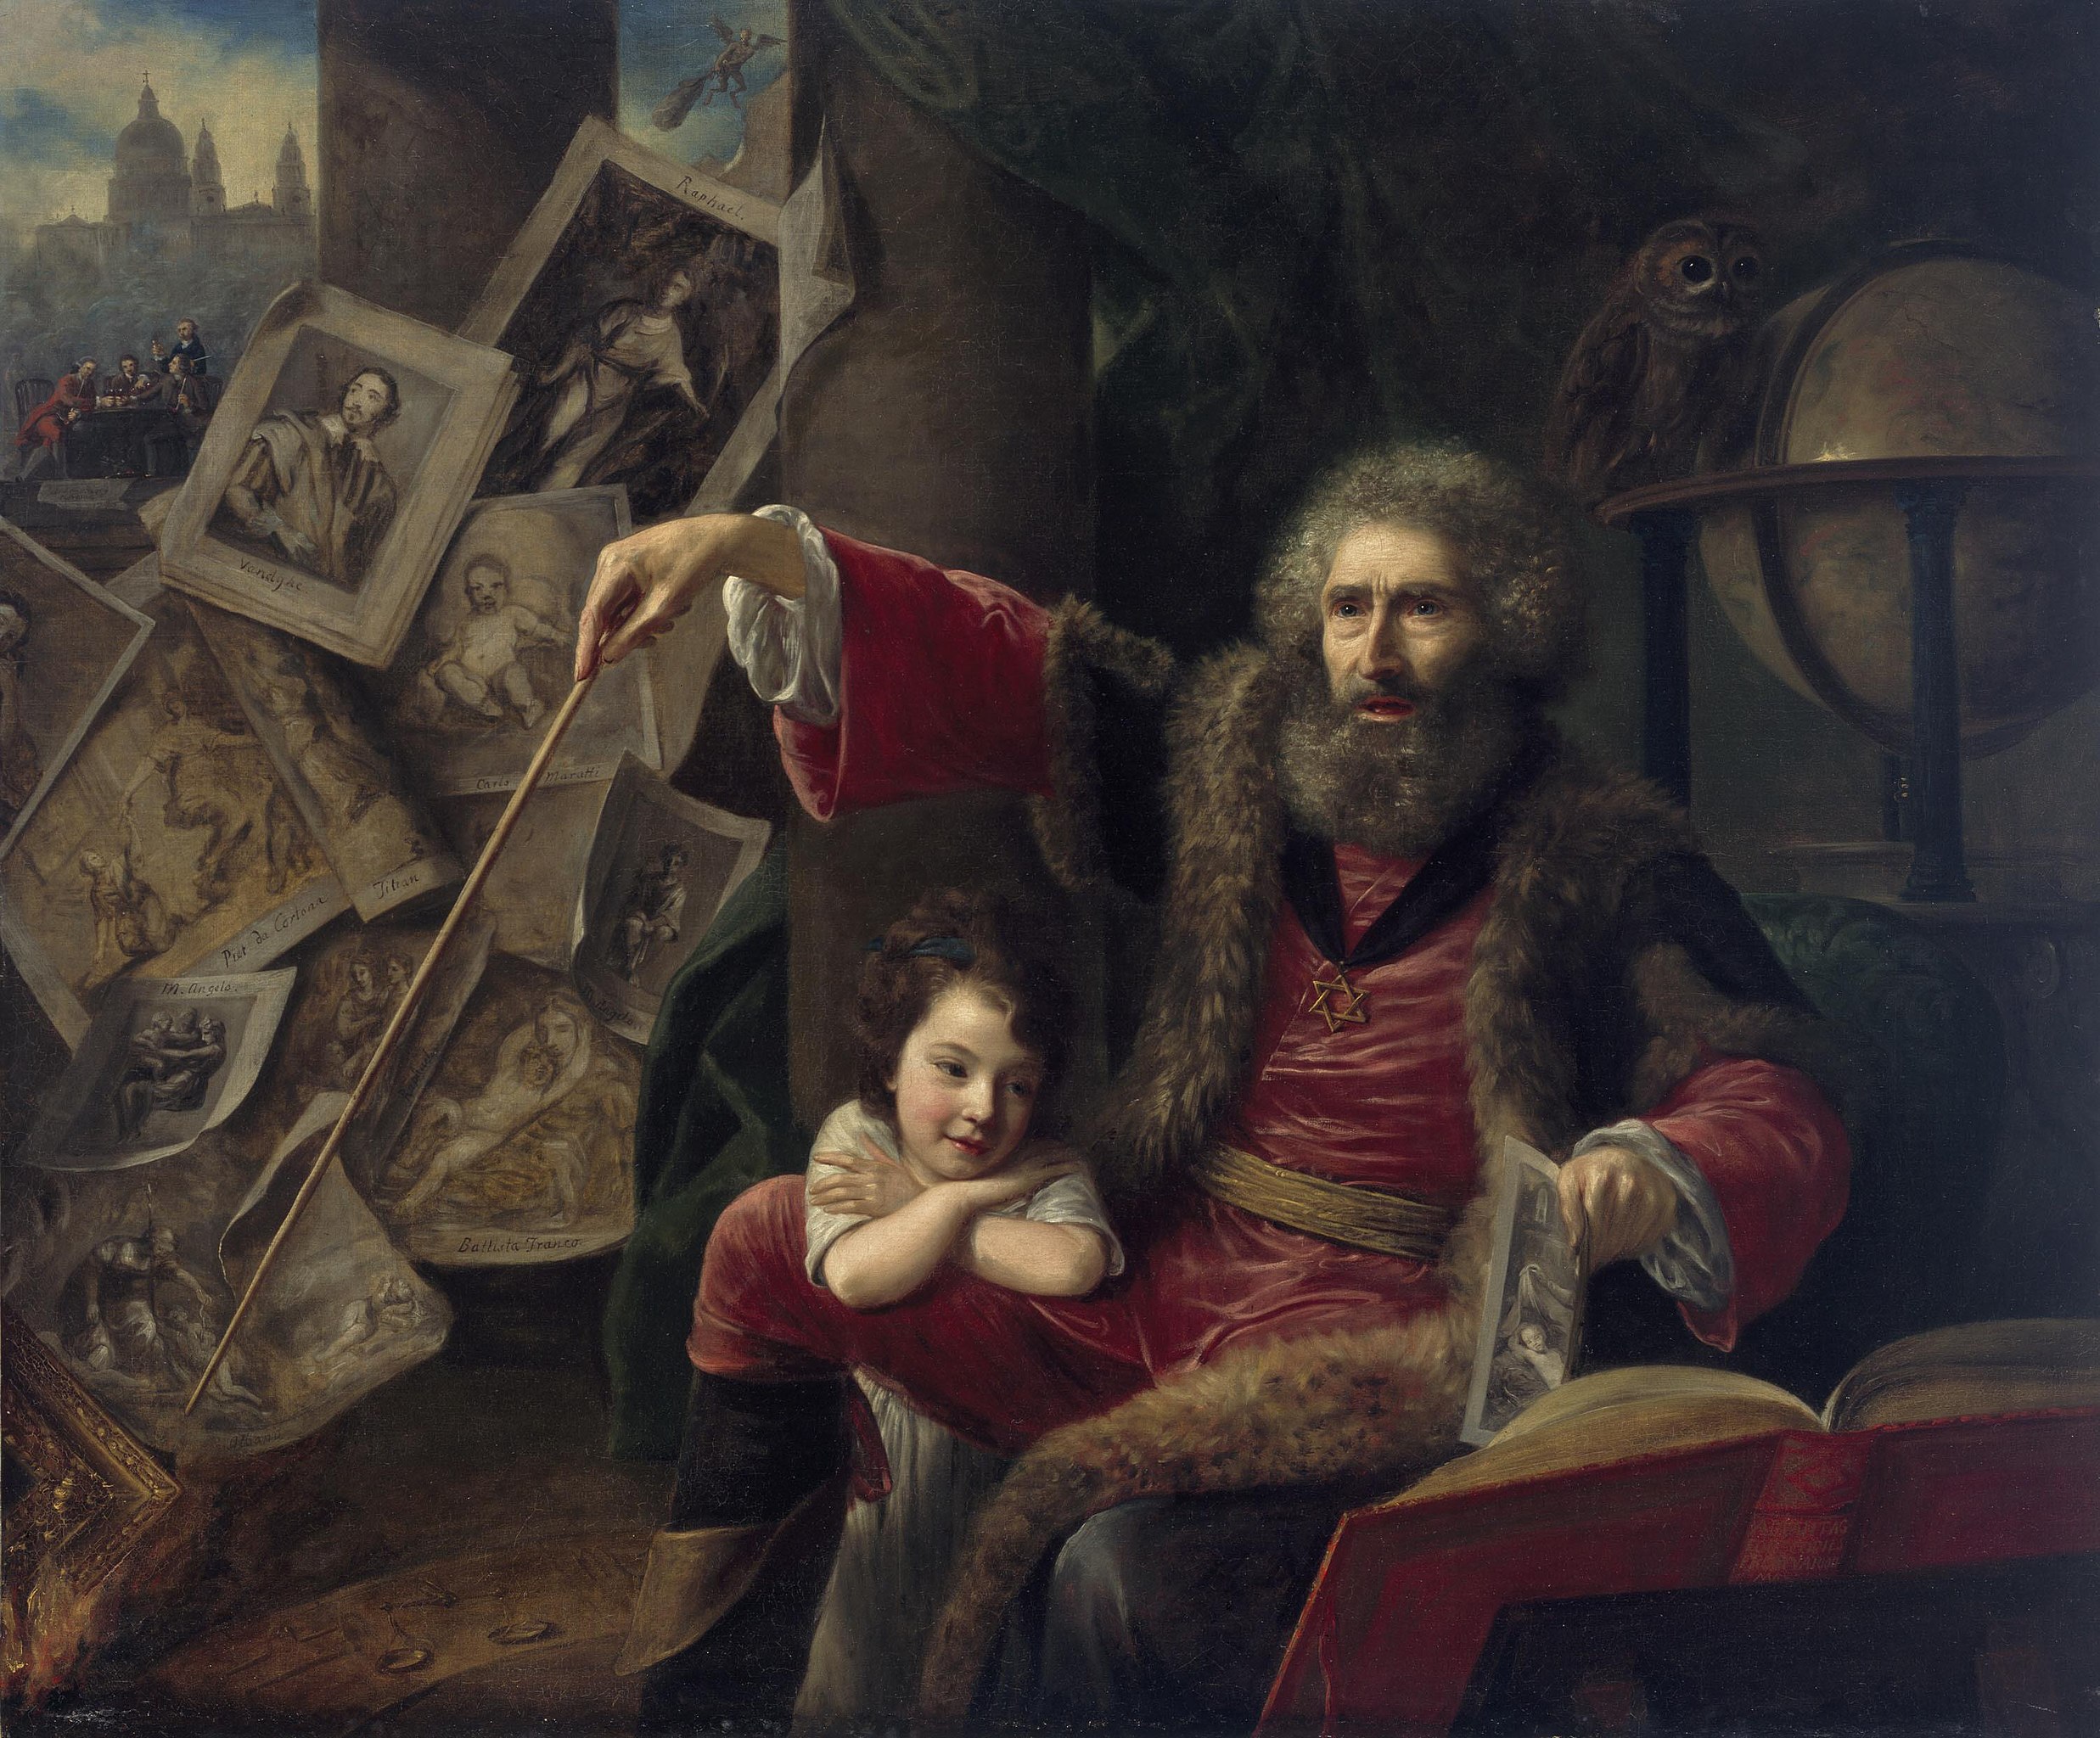 The Conjuror (The Pictorial Conjuror Displaying the Whole Art of Optical Deception) by Nathaniel Hone the Elder - 1775 - 145 x 173 cm National Gallery of Ireland